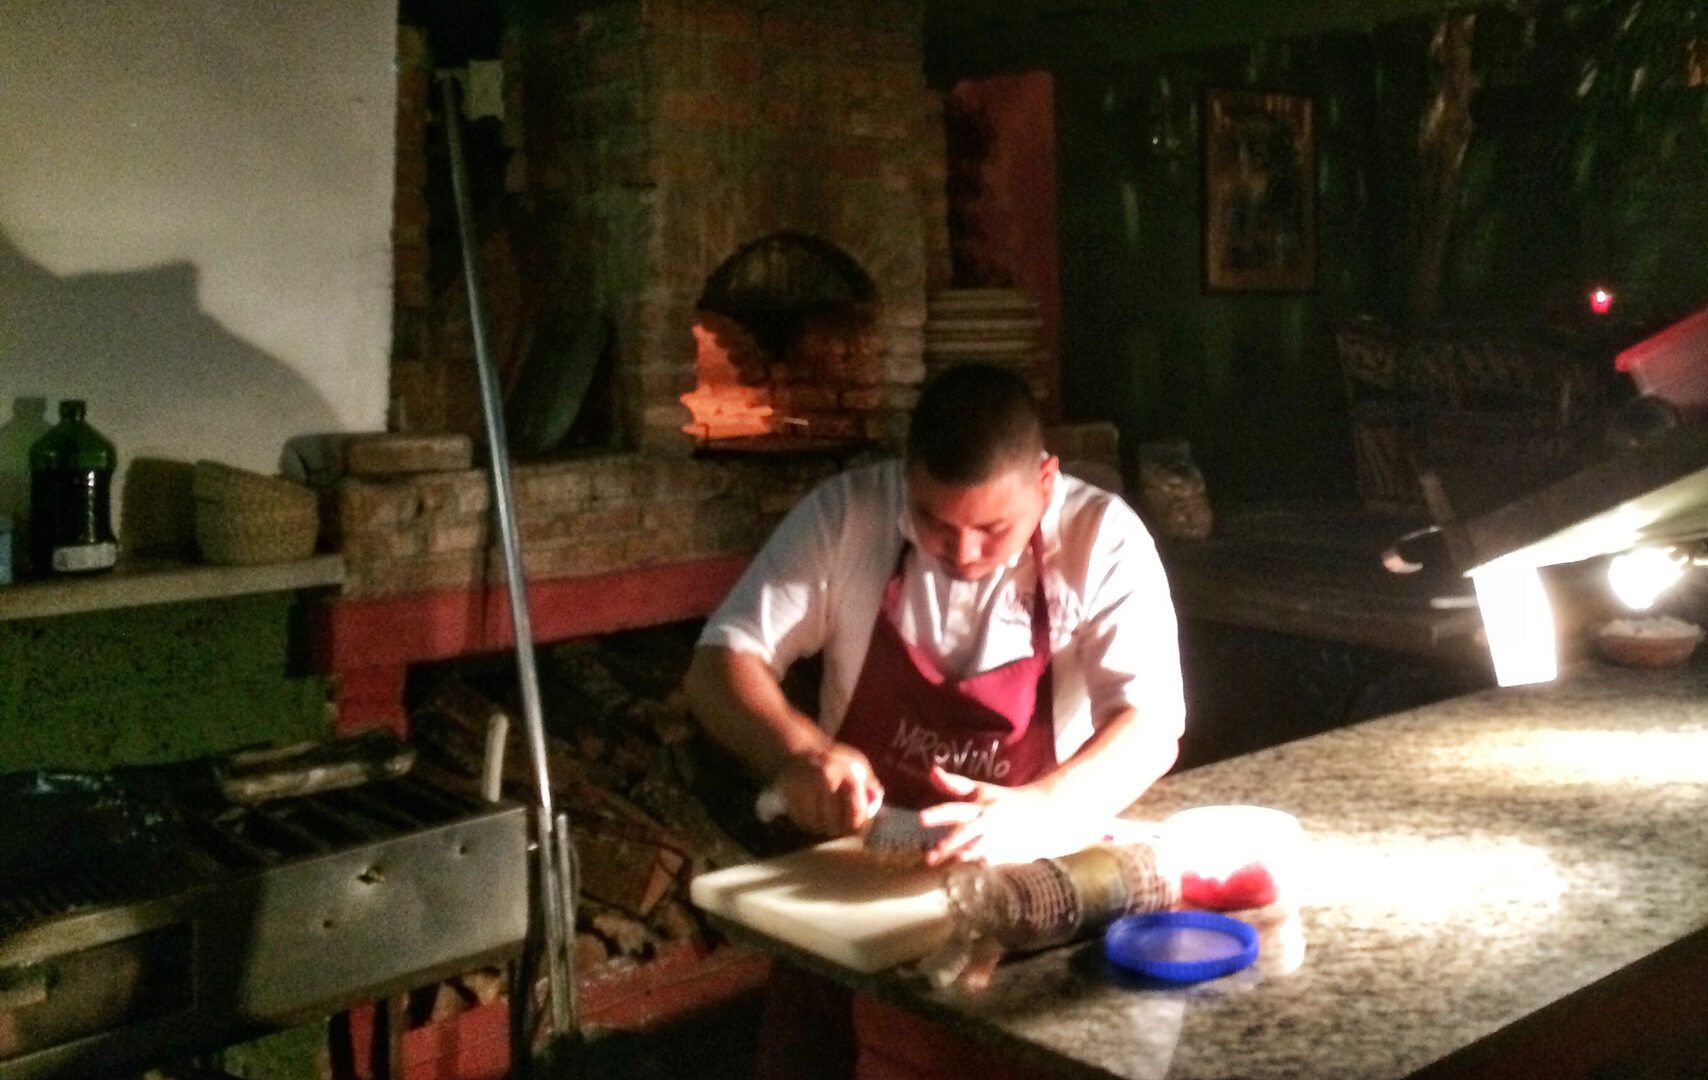 A man is preparing food in a kitchen.